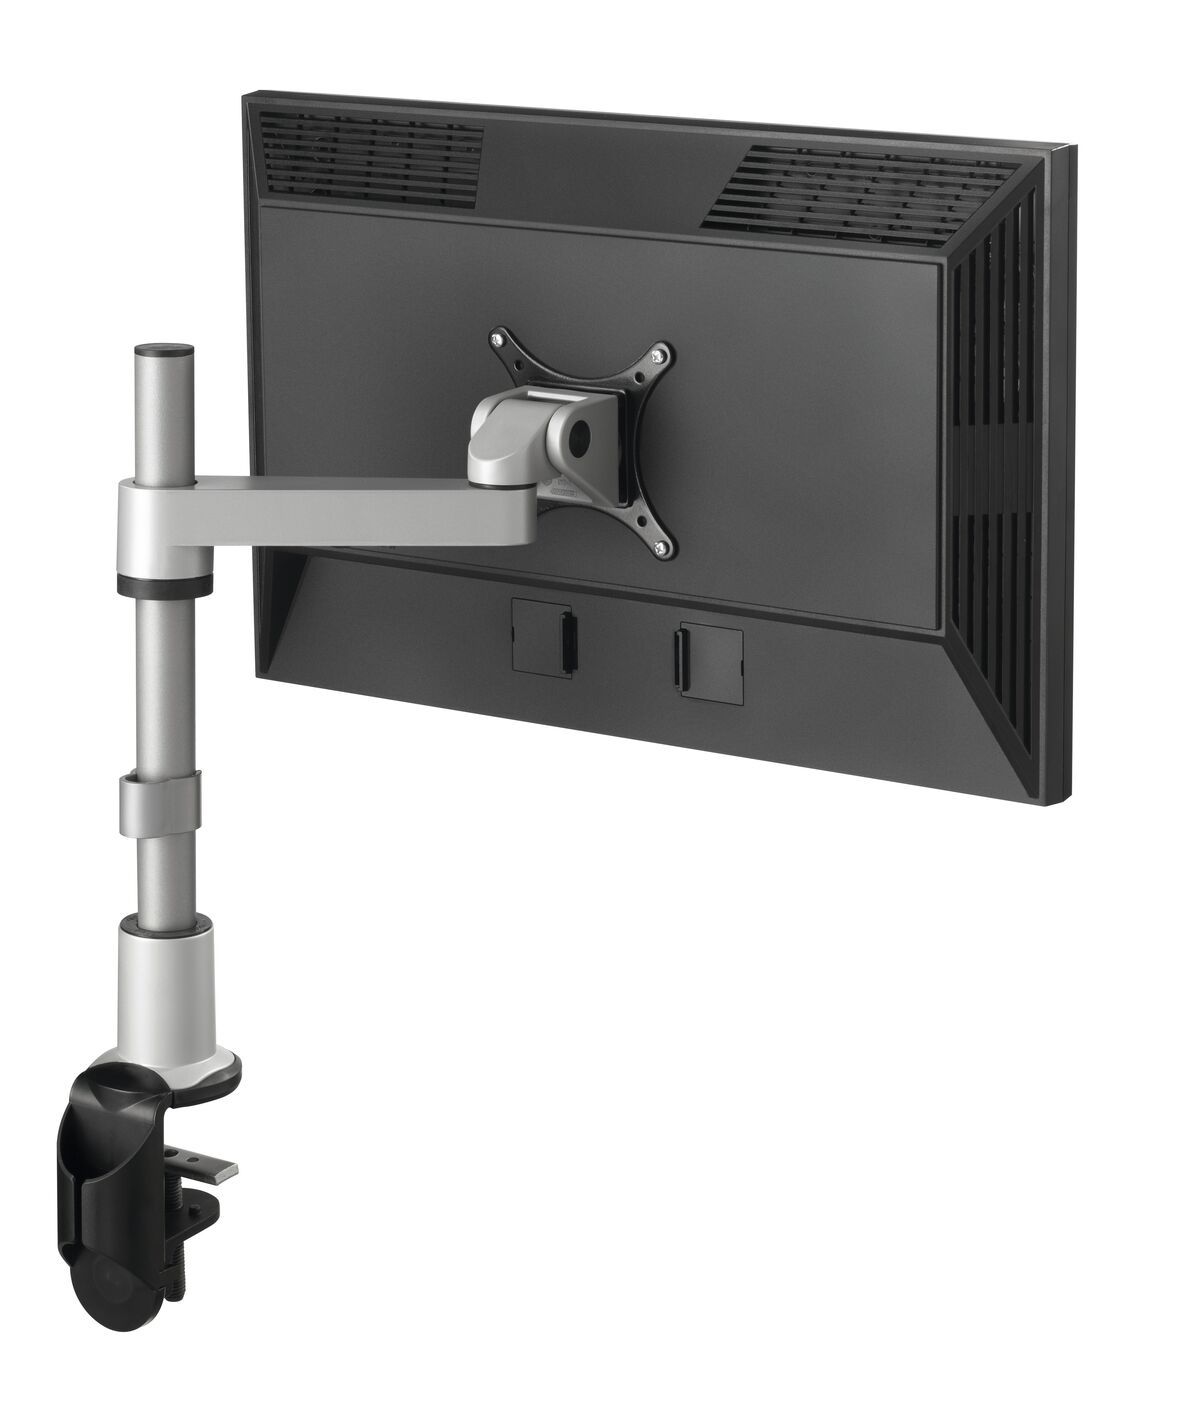 Vogel's PFD 8522 Monitor Arm static (silver) - For monitors up to 13 kg - Ideally suited for Gaming and (Home) Office - Application